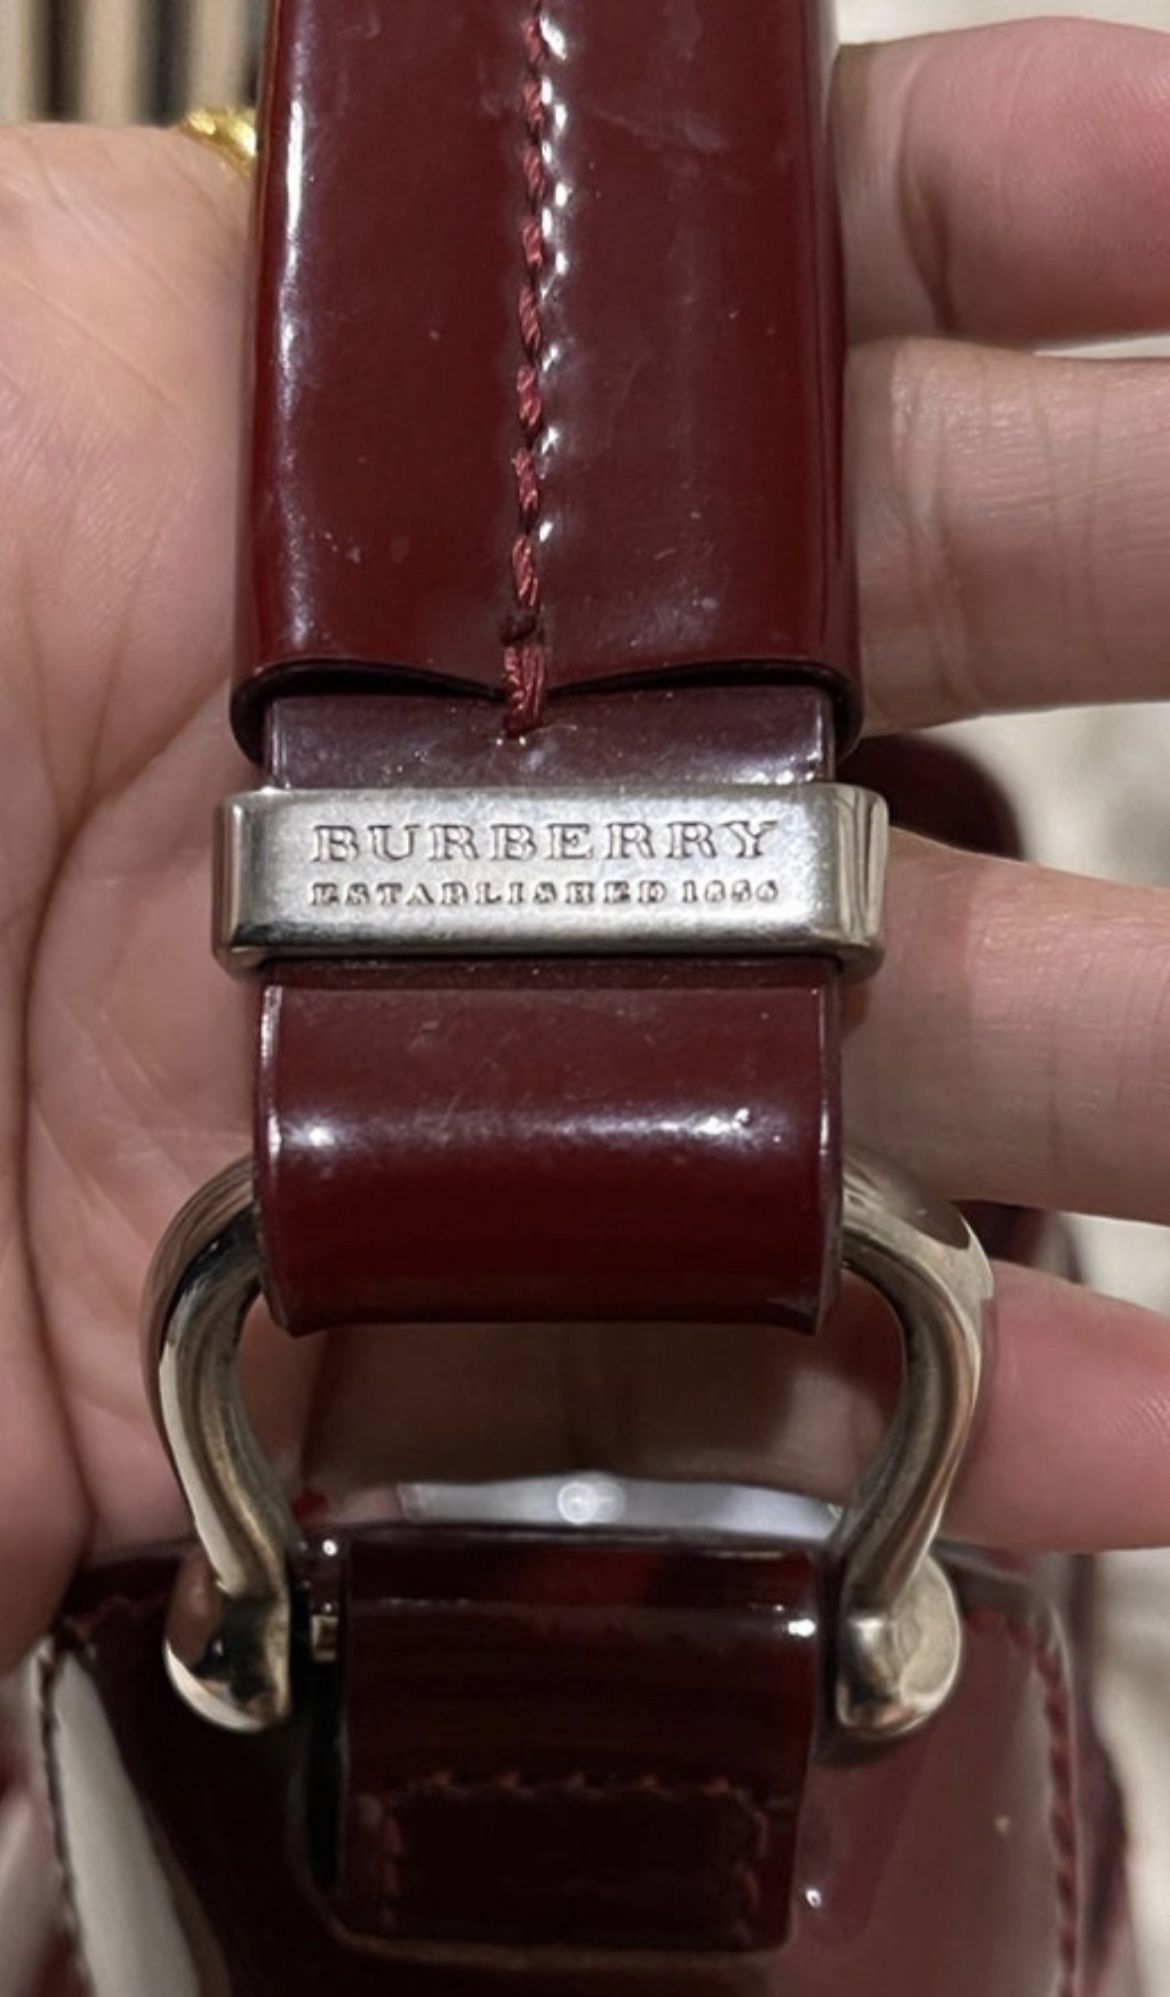 Burberry bags for sale in Cleveland, Ohio